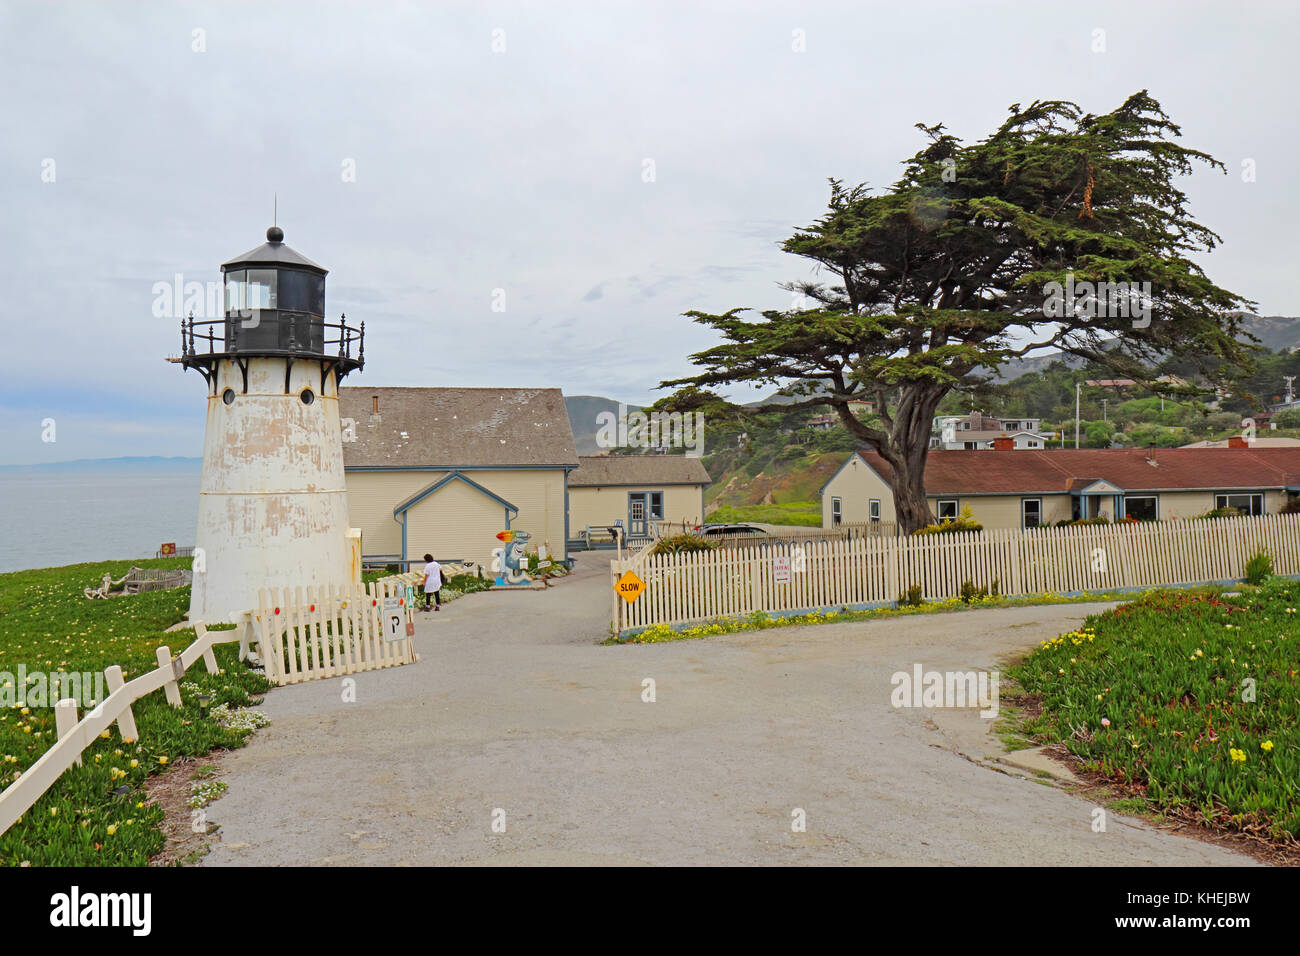 MONTARA, CALIFORNIA - MARCH 16 2015: Lighthouse, displays and entrance to the Point Montara Lighthouse Hostel off of California Highway 1 approximatel Stock Photo